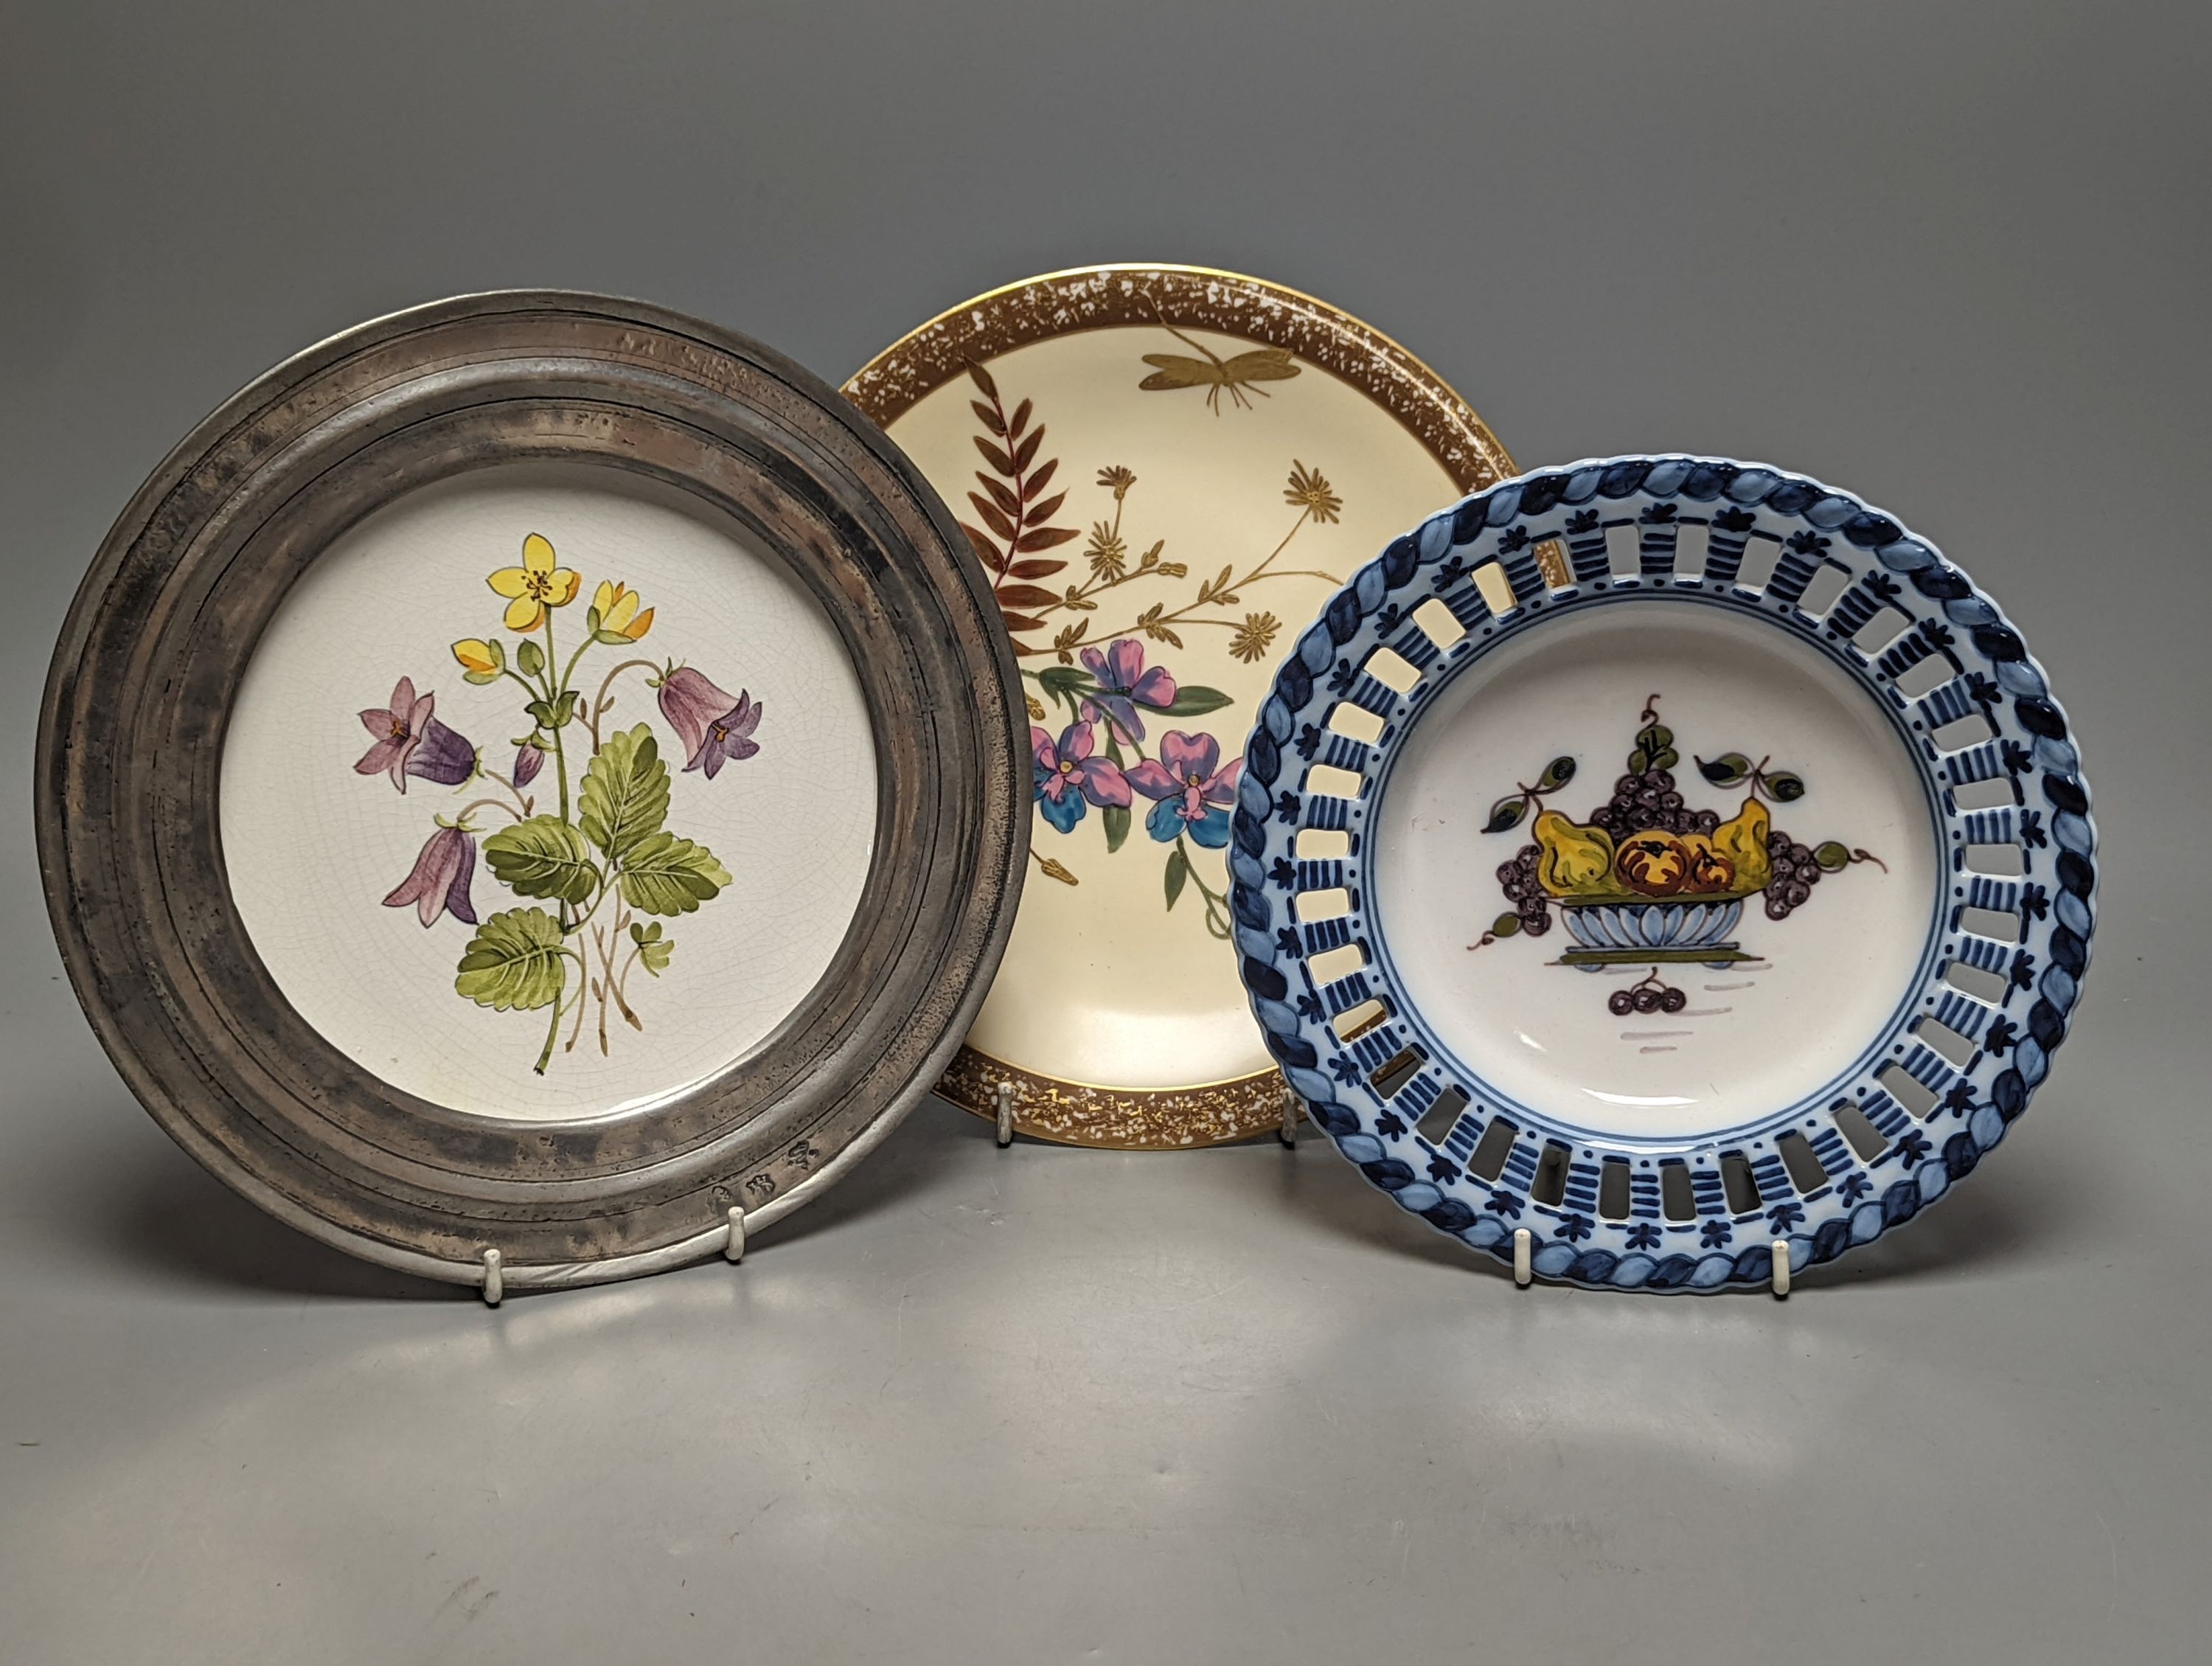 A collection of French pewter and ceramic plates, a set of Dutch fruit plates and a 2 part dessert service, large Rosenthal studioline Versace plates